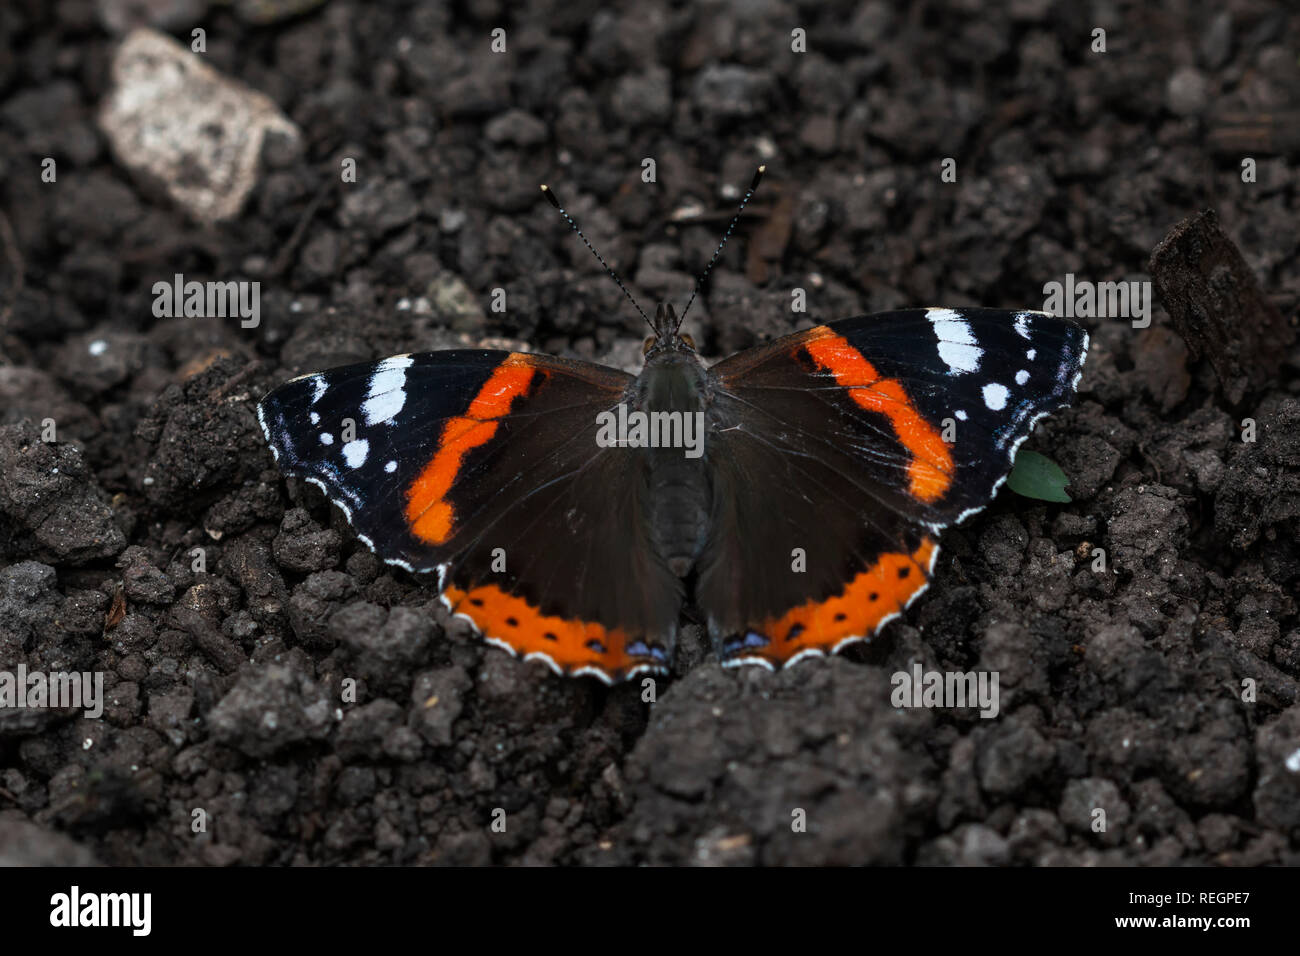 Red Admiral butterfly resting on soil Stock Photo